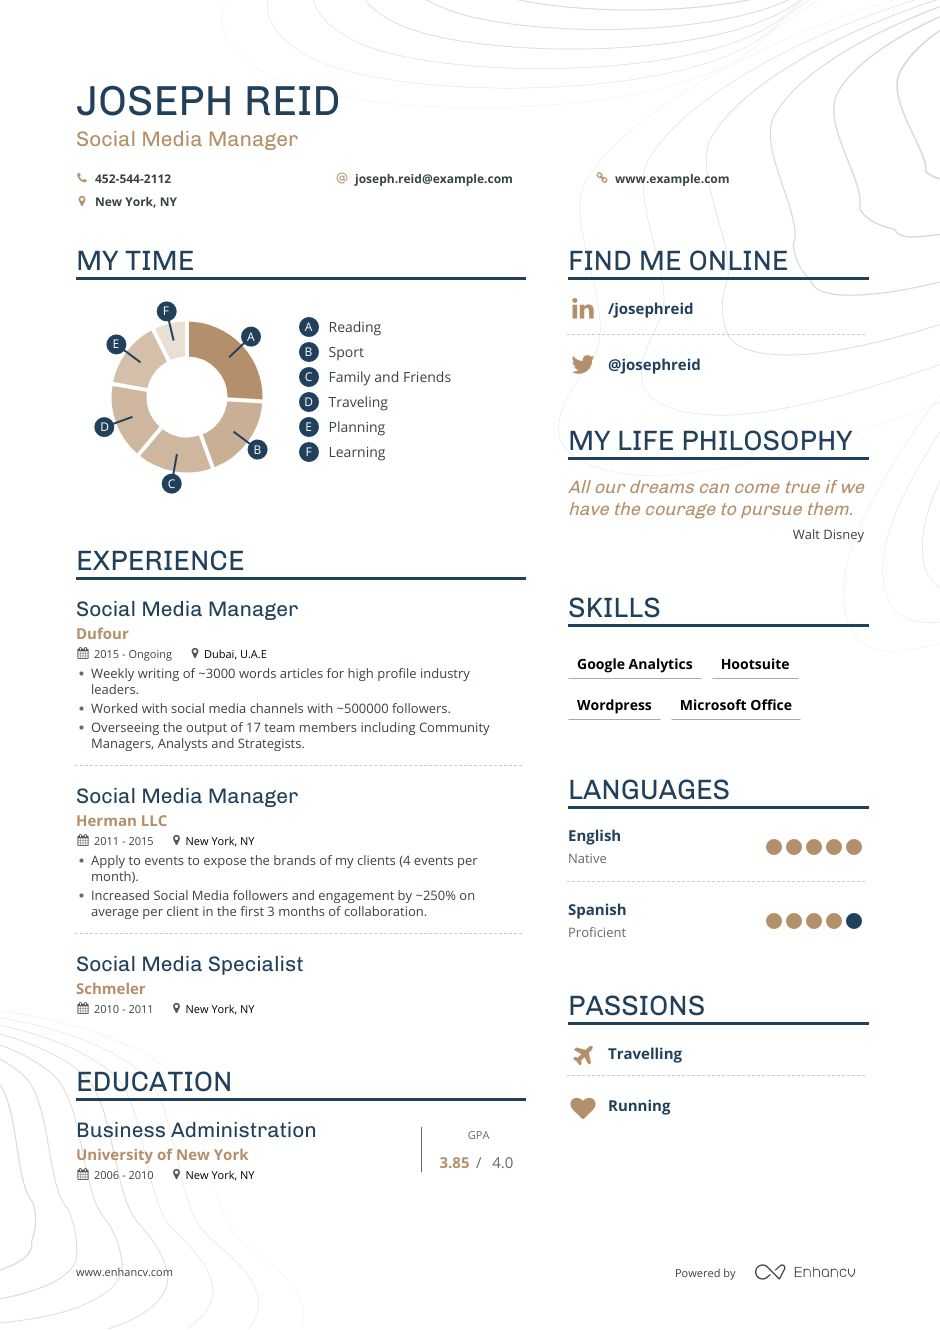 Social Media Manager Resume Examples Skills Templates More for 2020